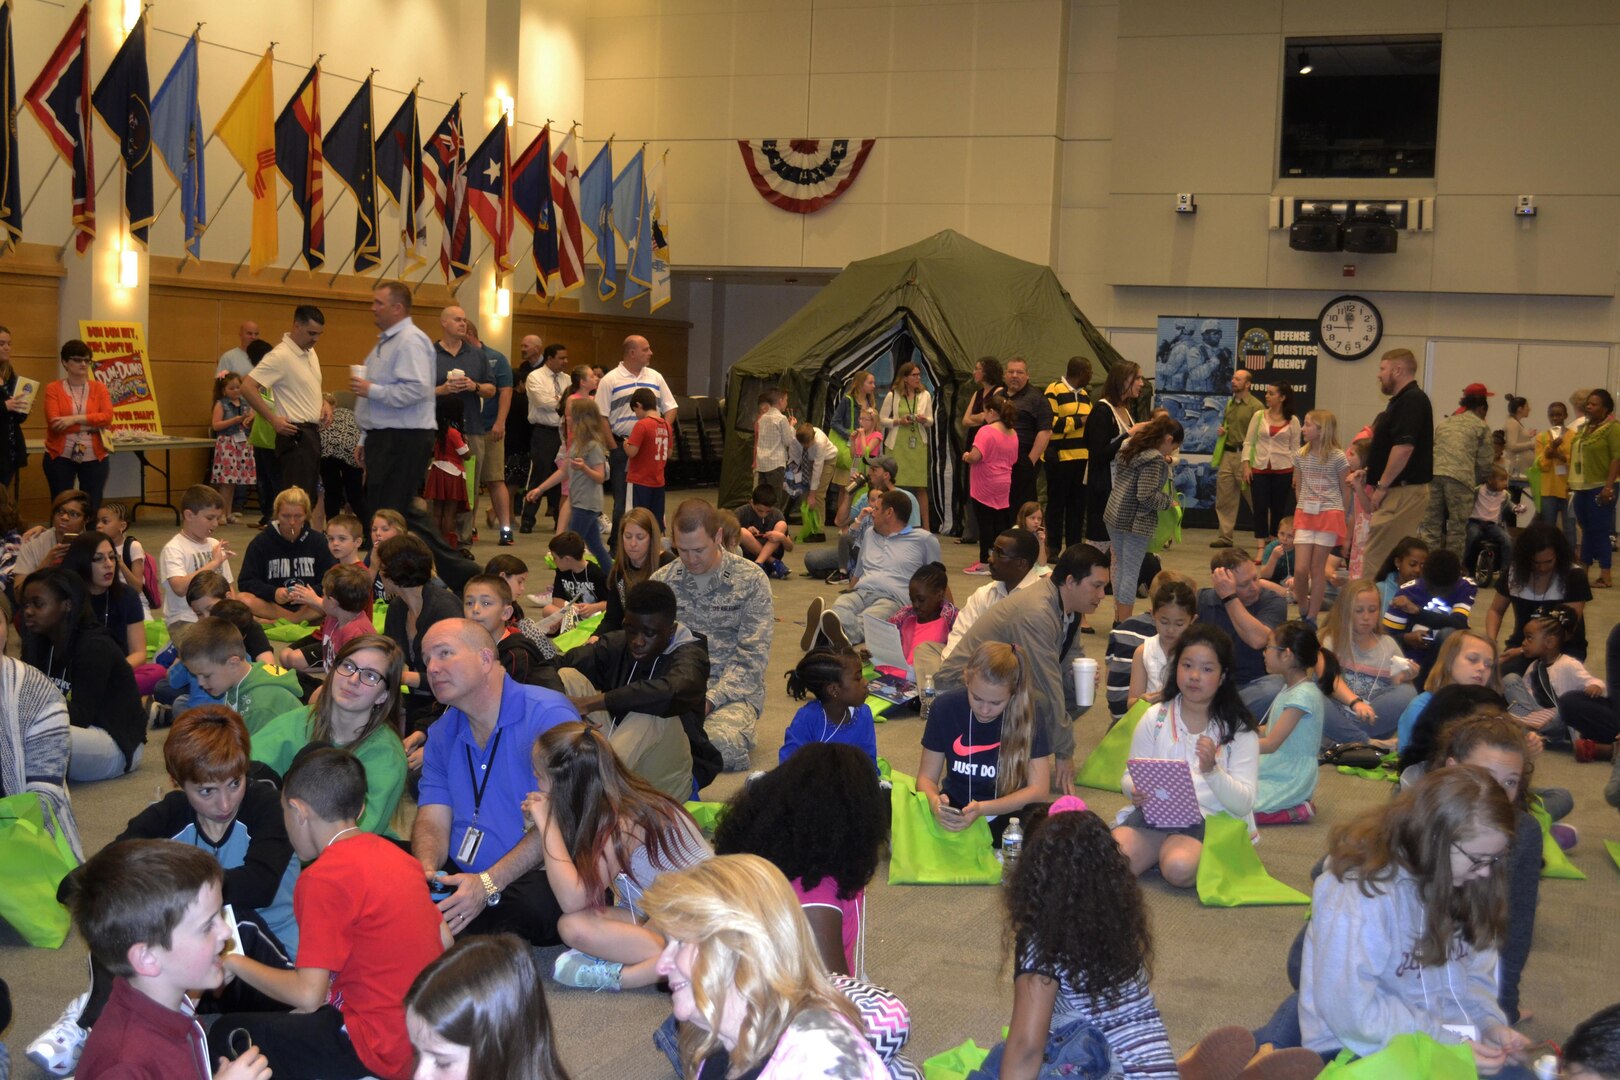 Children and parents gather on the floor of the DLA Troop Support Bldg. 6 auditorium at the start of Take Our Daughters and Sons to Work Day April 27, 2017. More than 440 children participated in interactive activities to learn more about the missions of DLA Troop Support and NAVSUP Weapon Systems Support. Photo by Agneta Murnan Children and parents gather on the floor of the DLA Troop Support Bldg. 6 auditorium at the start of Take Our Daughters and Sons to Work Day April 27, 2017. More than 440 children participated in interactive activities to learn more about the missions of DLA Troop Support and NAVSUP Weapon Systems Support. 
